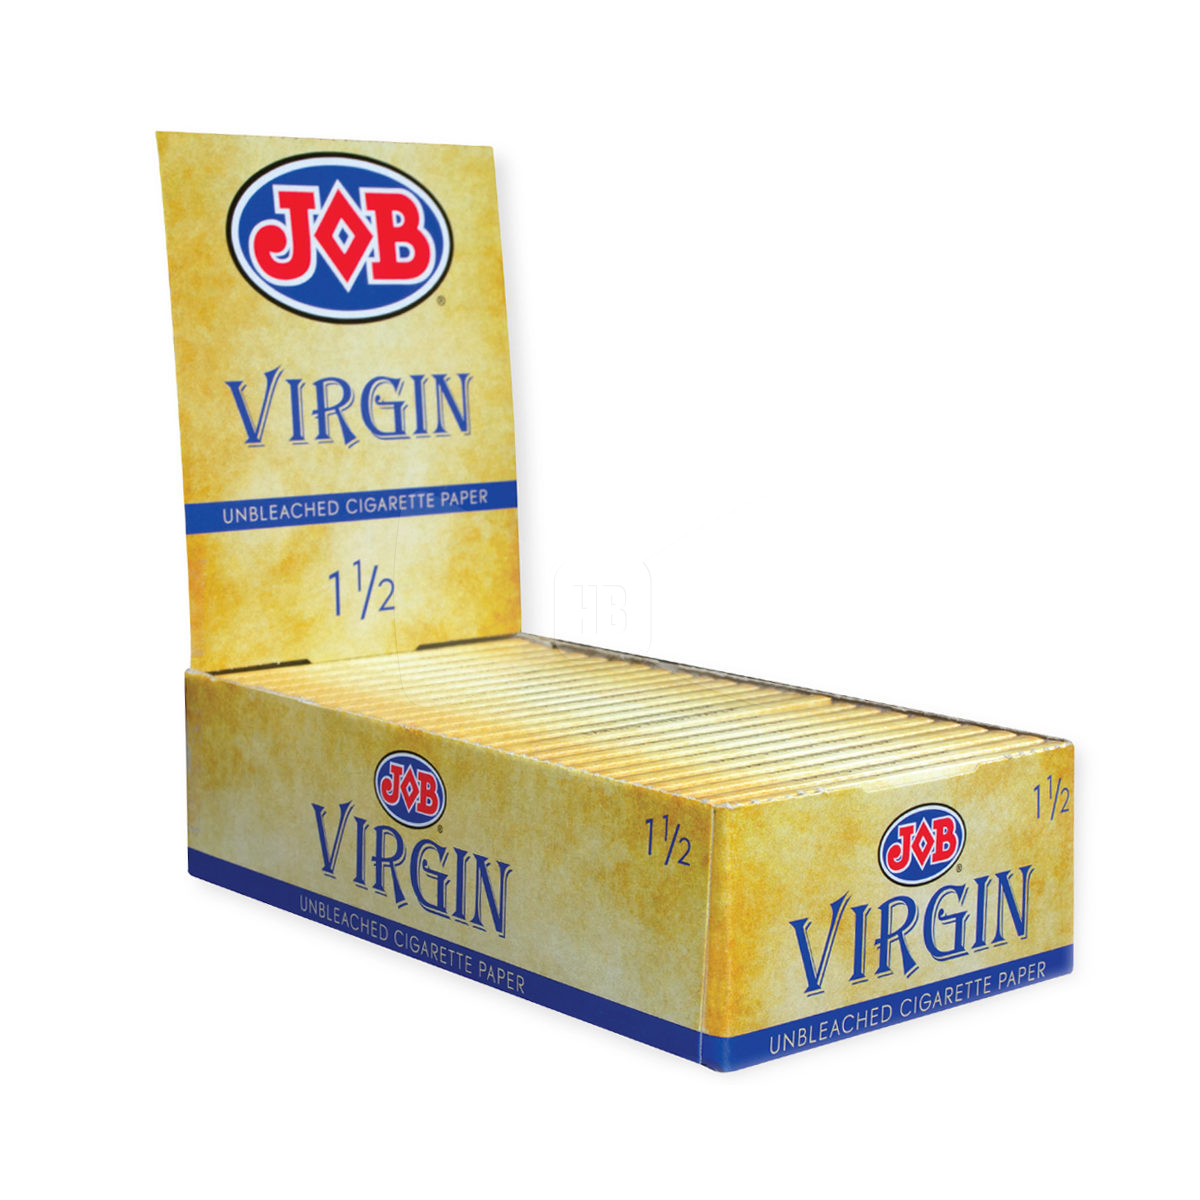 JOB Virgin Unbleached Rolling Papers 1 1/2 Box